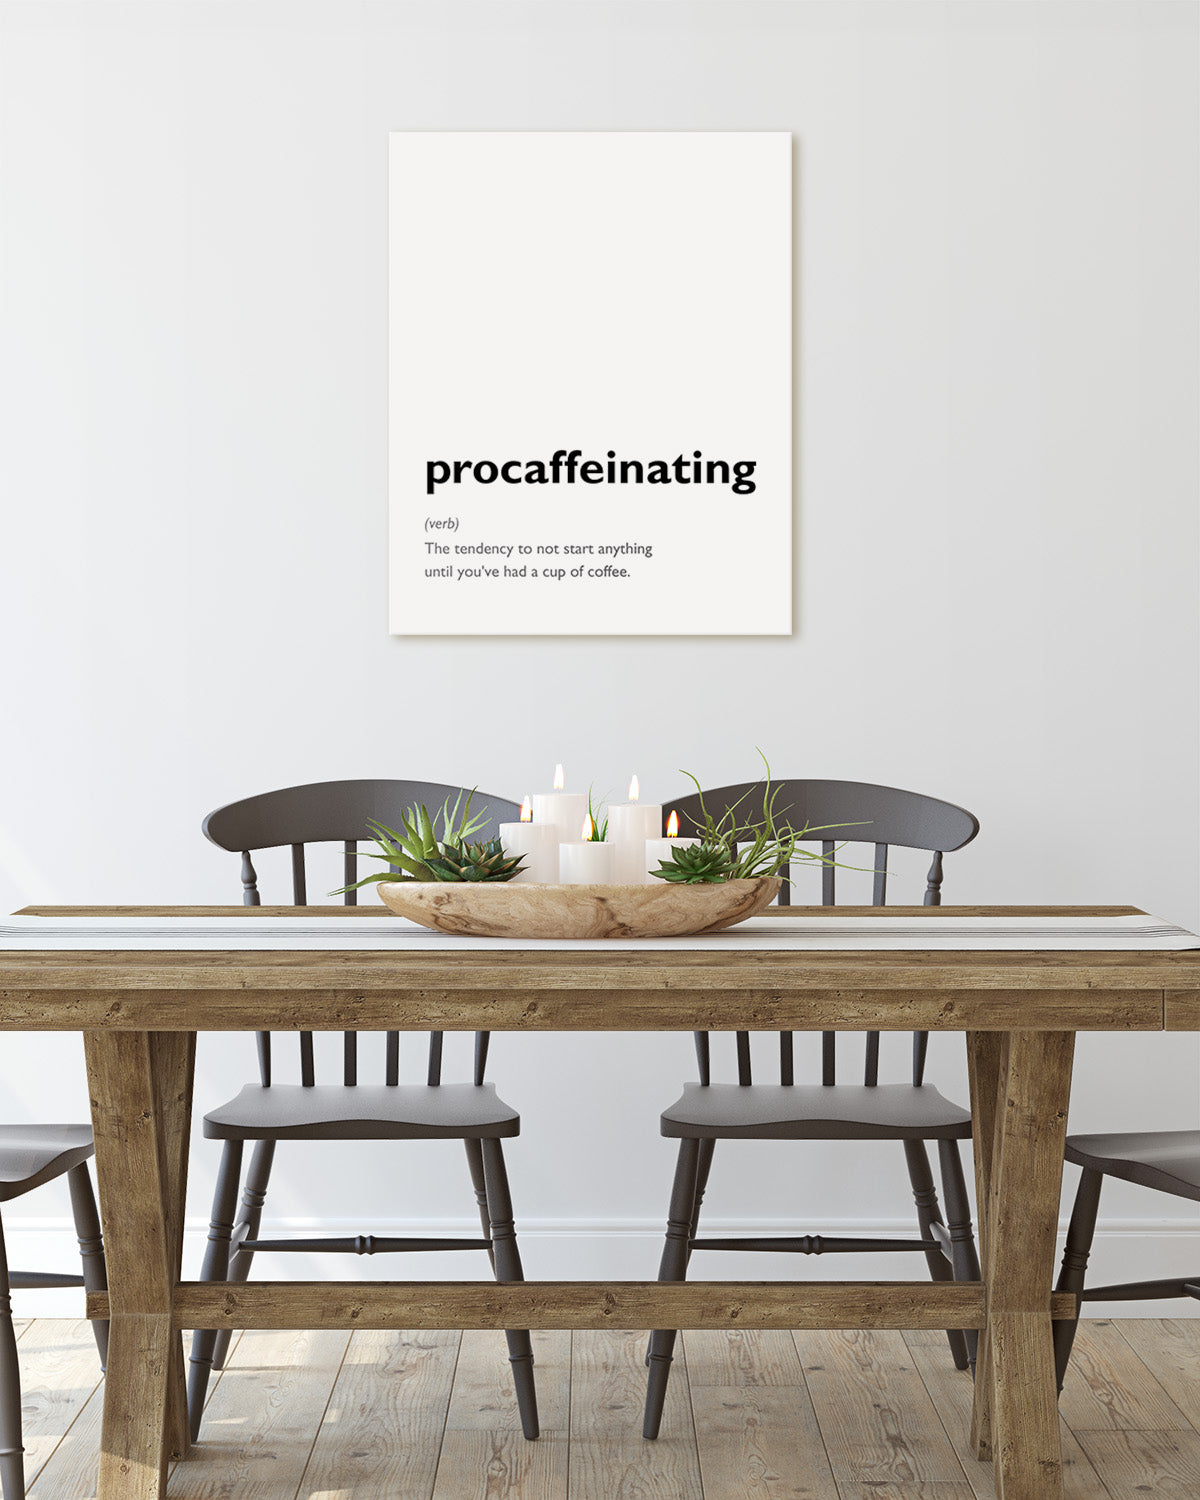 Procaffeinating Definition Wall Art - Funny Gift for Coffee Lovers - Minimalist Modern Typography Wall Decor - Kitchen Wall Decor - Gift for Coffee Drinkers